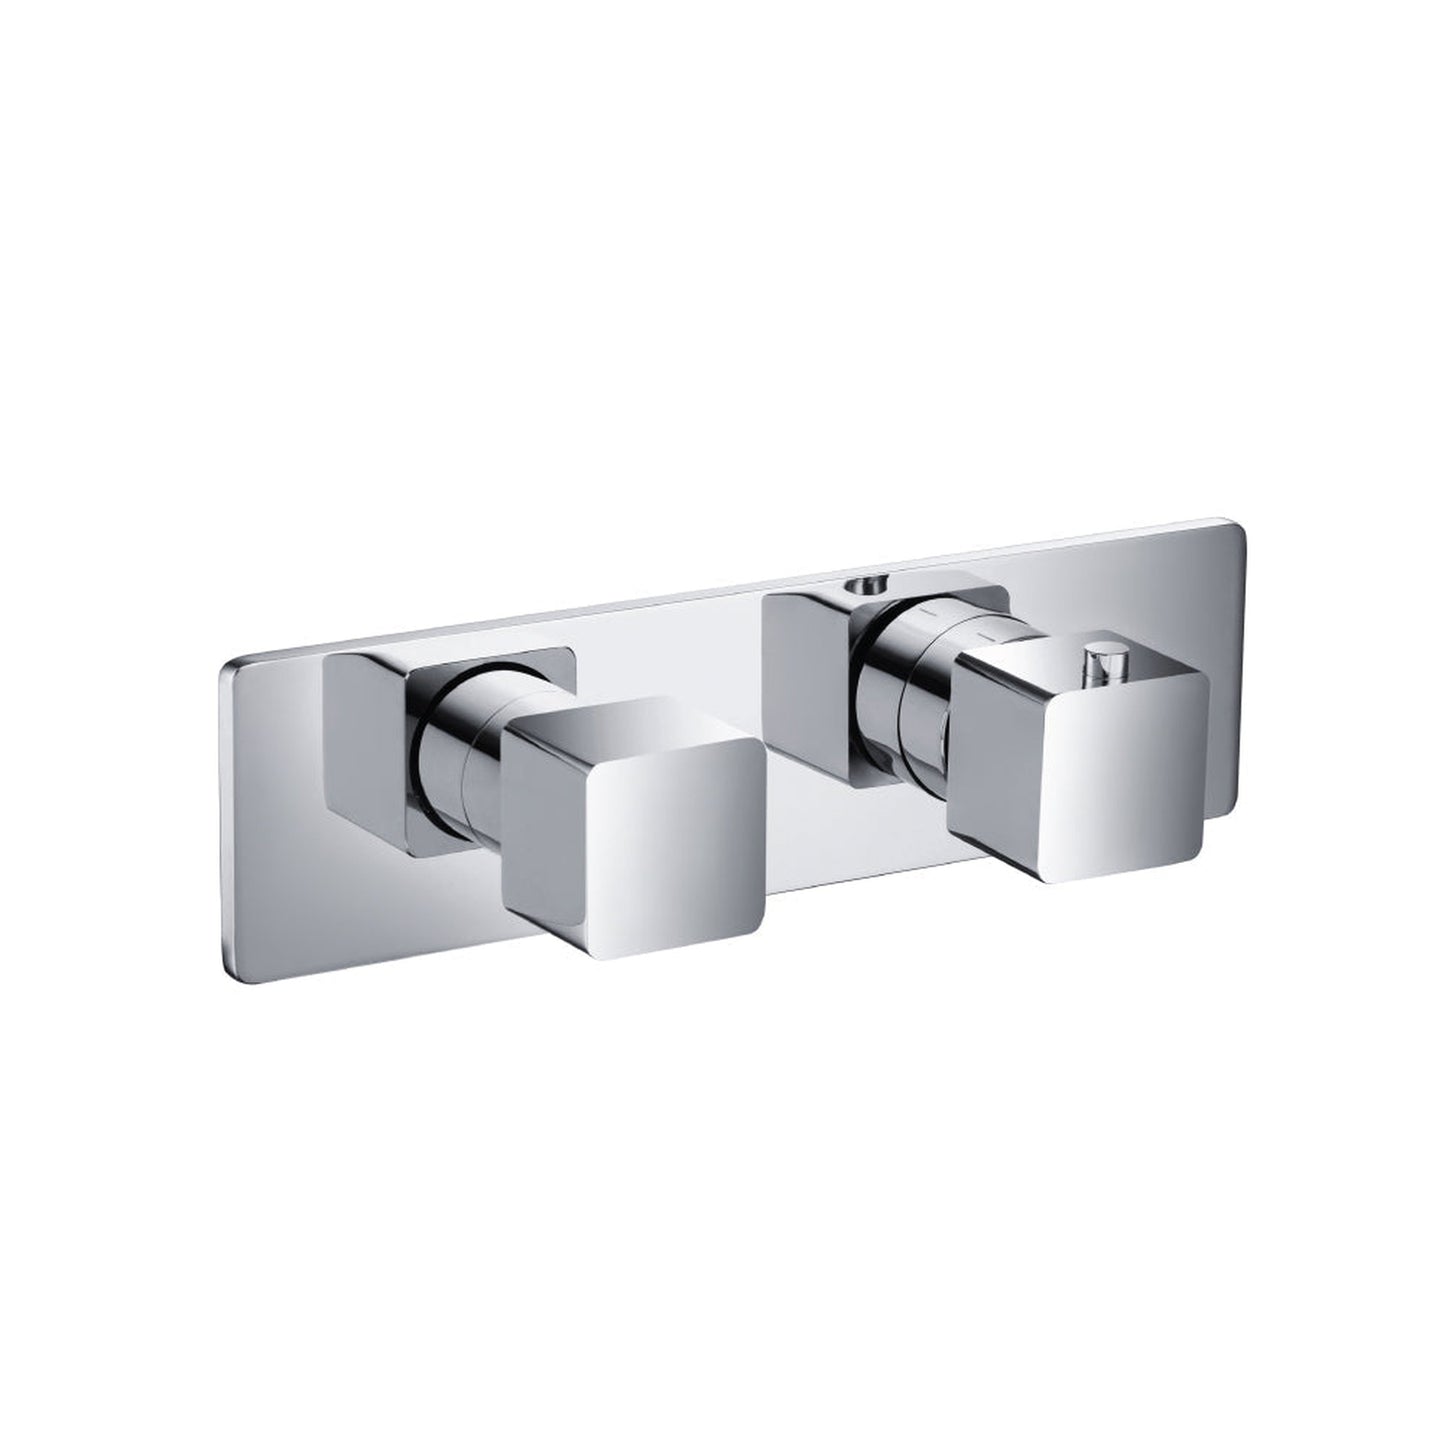 Isenberg Serie 196 3/4" Single Output Horizontal Thermostatic Shower Valve and Trim in Brushed Nickel (196.2693BN)